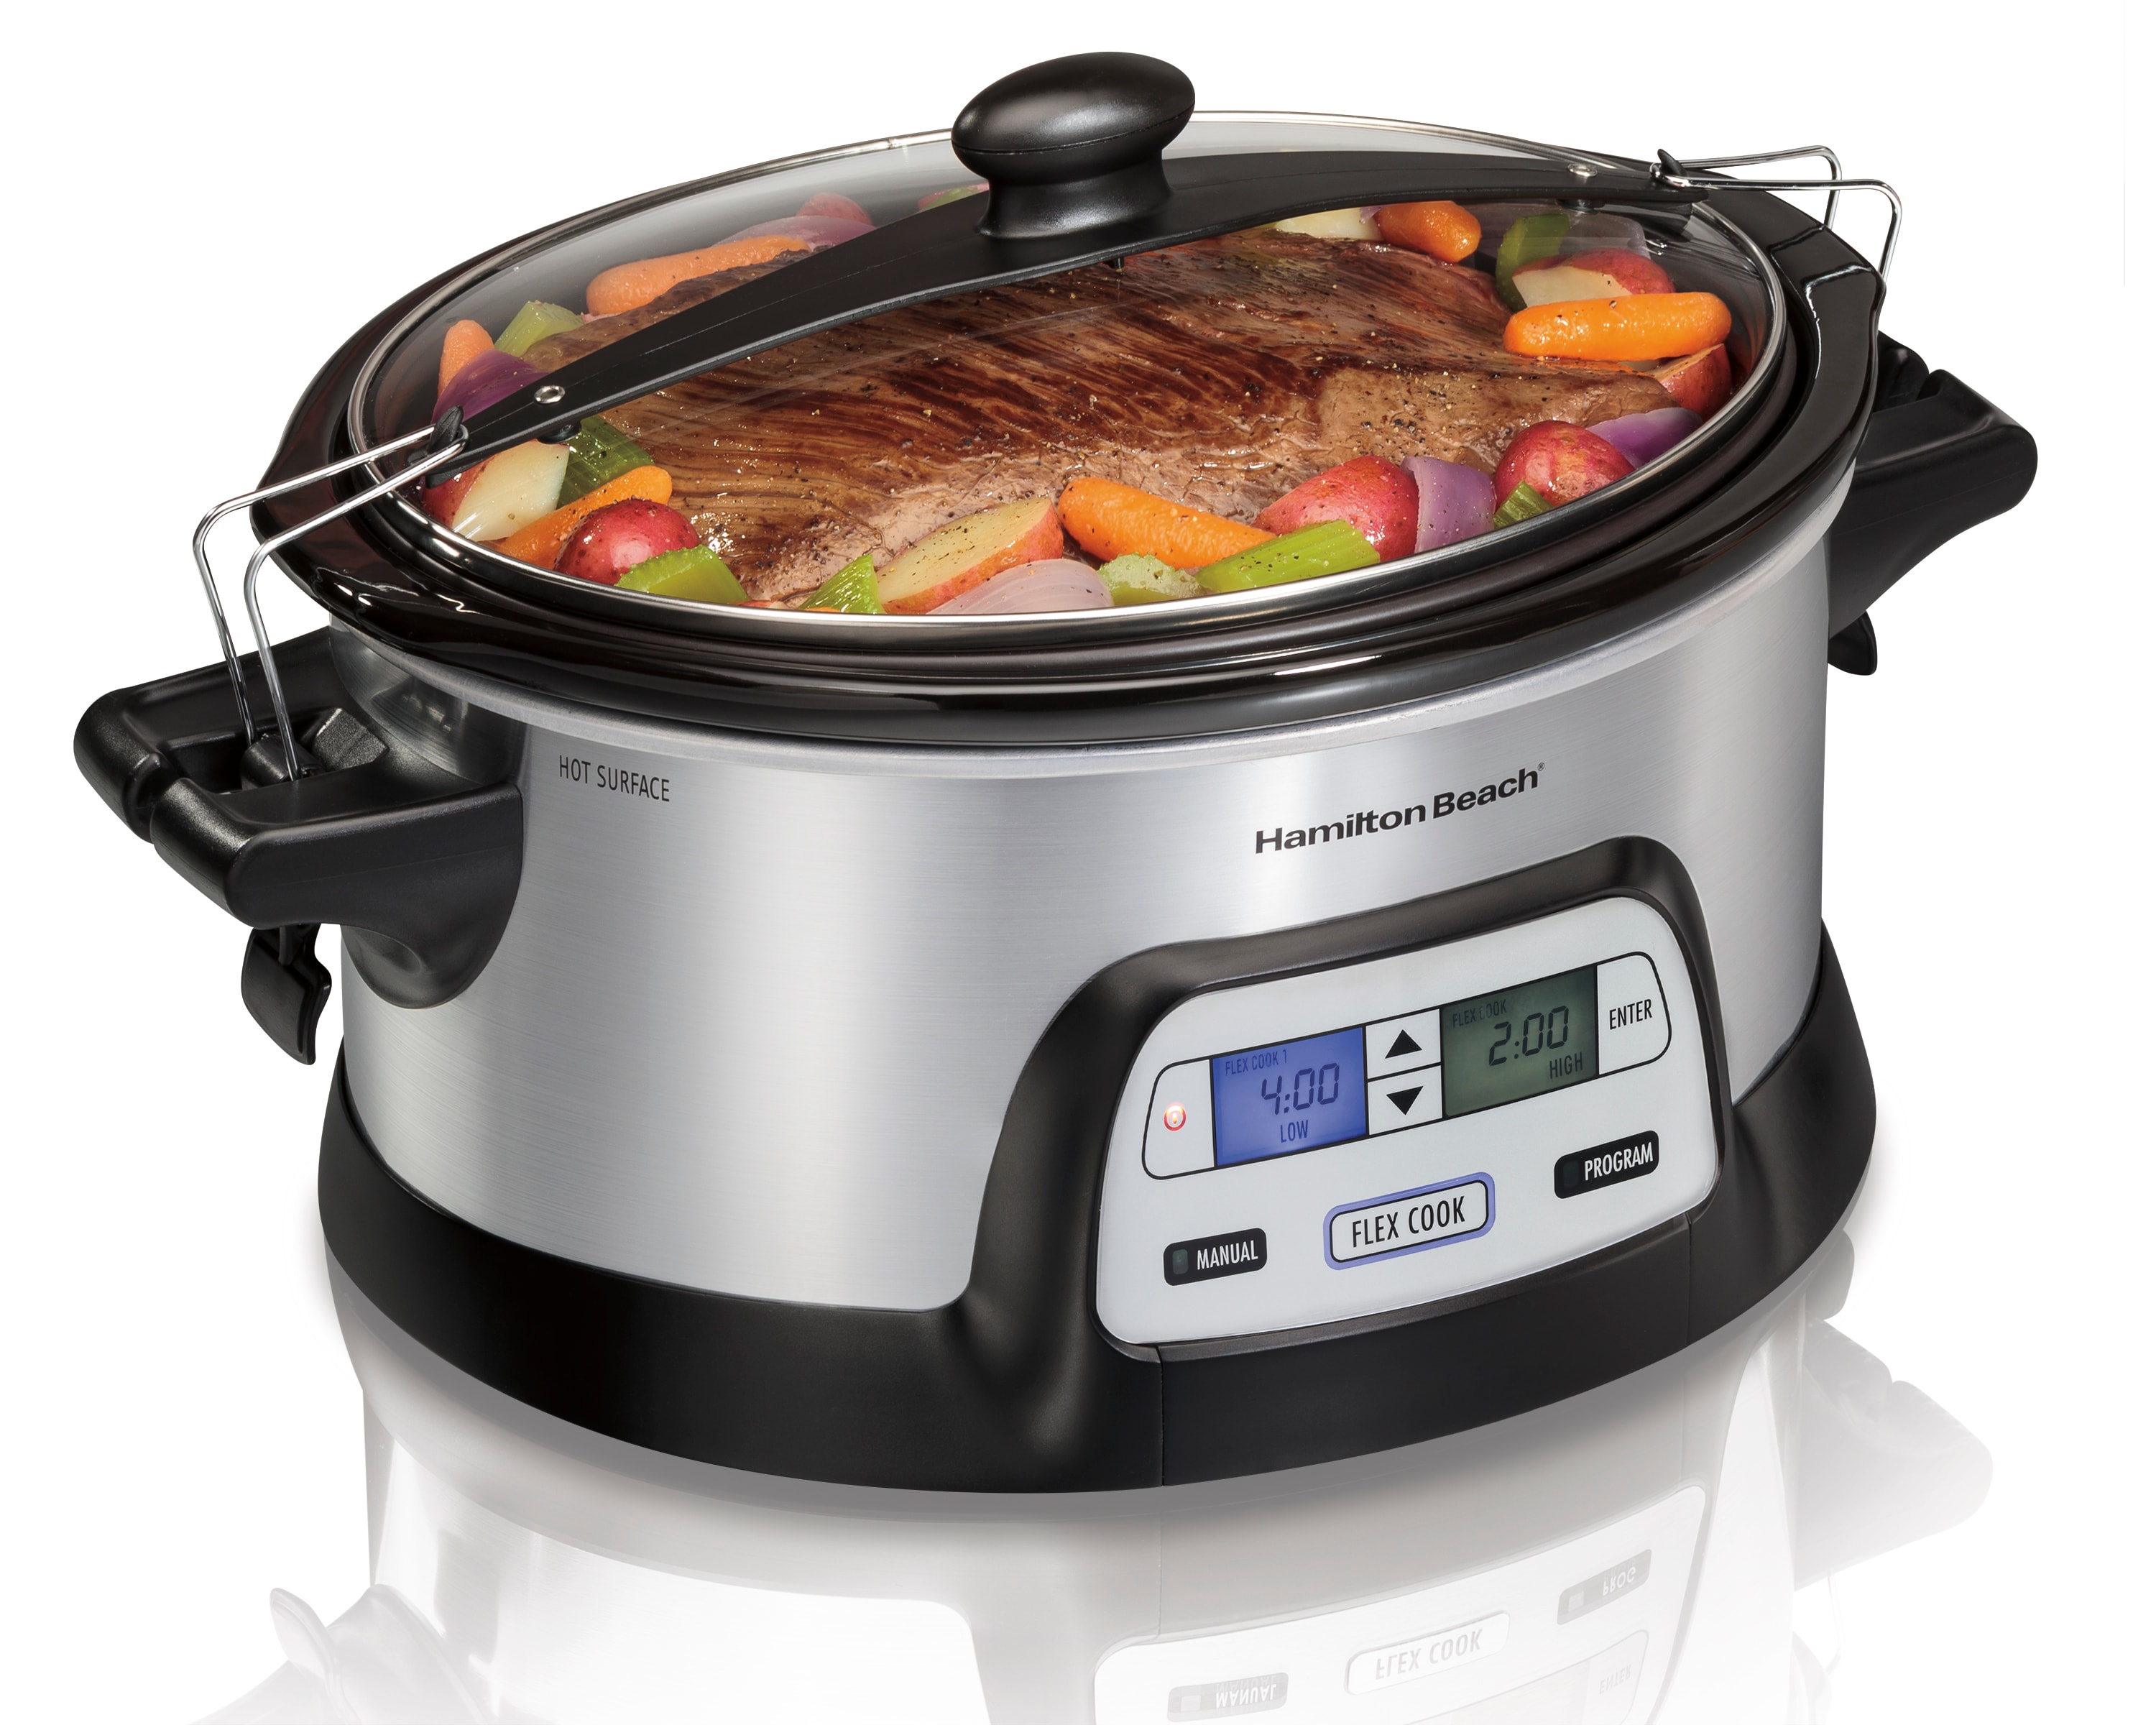 Hamilton Beach Programmable FlexCook 6 Qt Slow Cooker - Stainless Steel,  Oval Shape, Large Size, Programmable, Lockable, cETLus Safety Listed in the Slow  Cookers department at